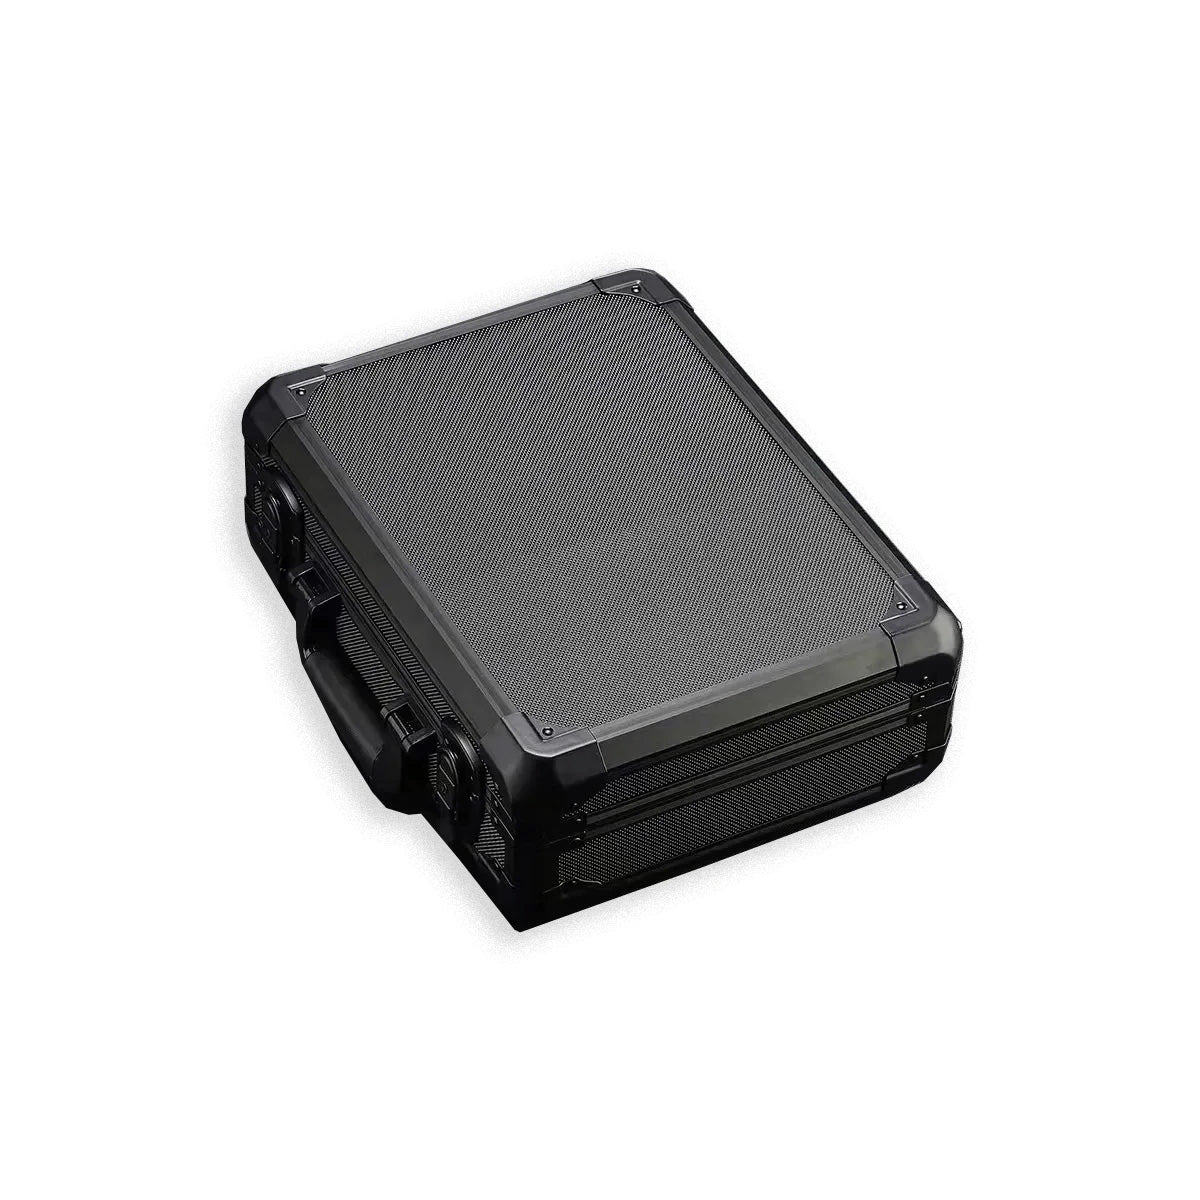 18 Slot High-Strength Aluminum Alloy Case with Lock